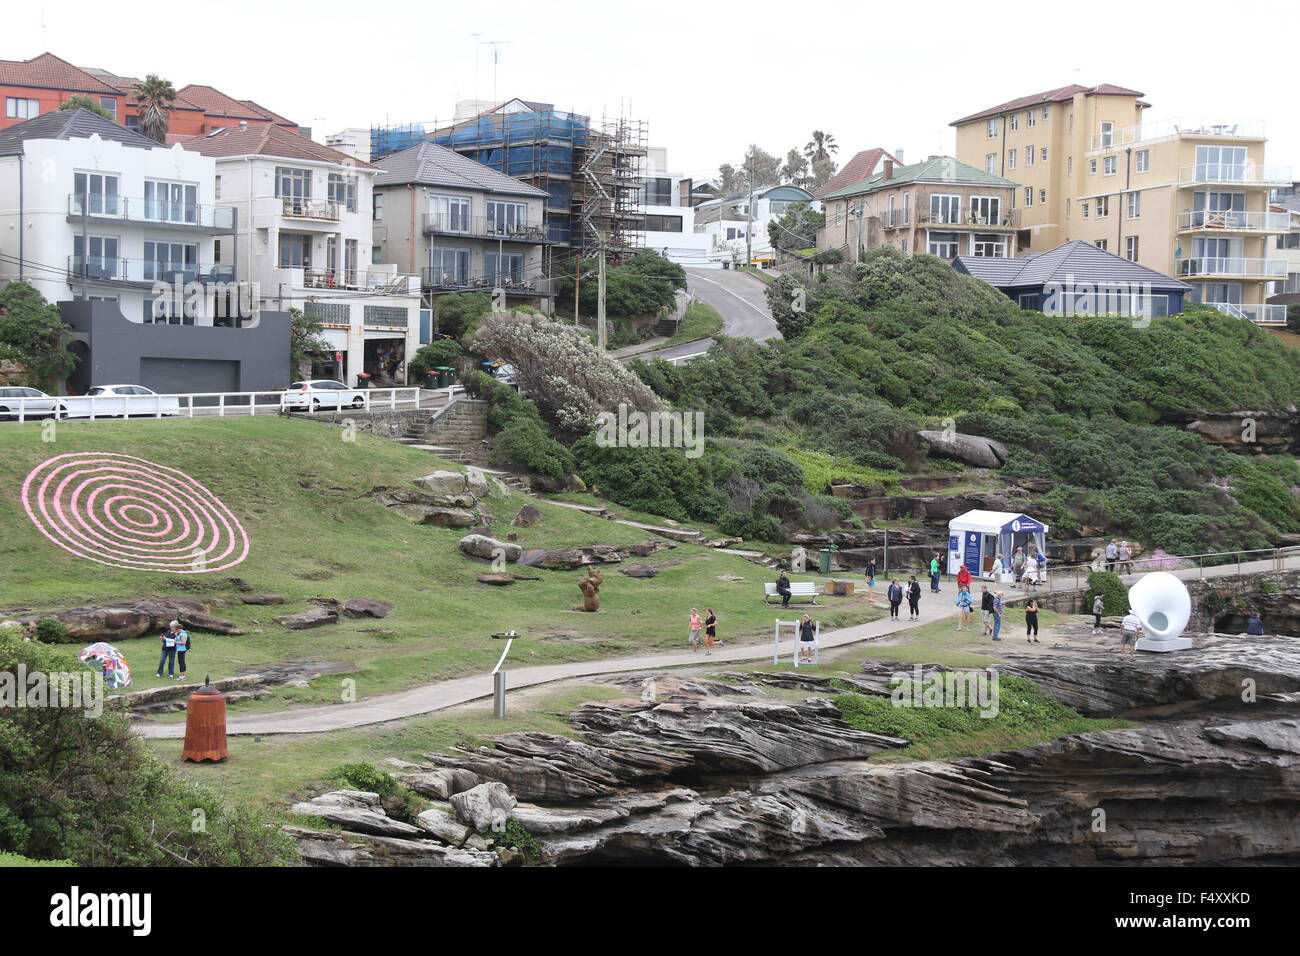 107 different sculptures can be seen at the 19th annual Sculpture by the Sea Bondi exhibition along the coastal walk to Tamarama Stock Photo